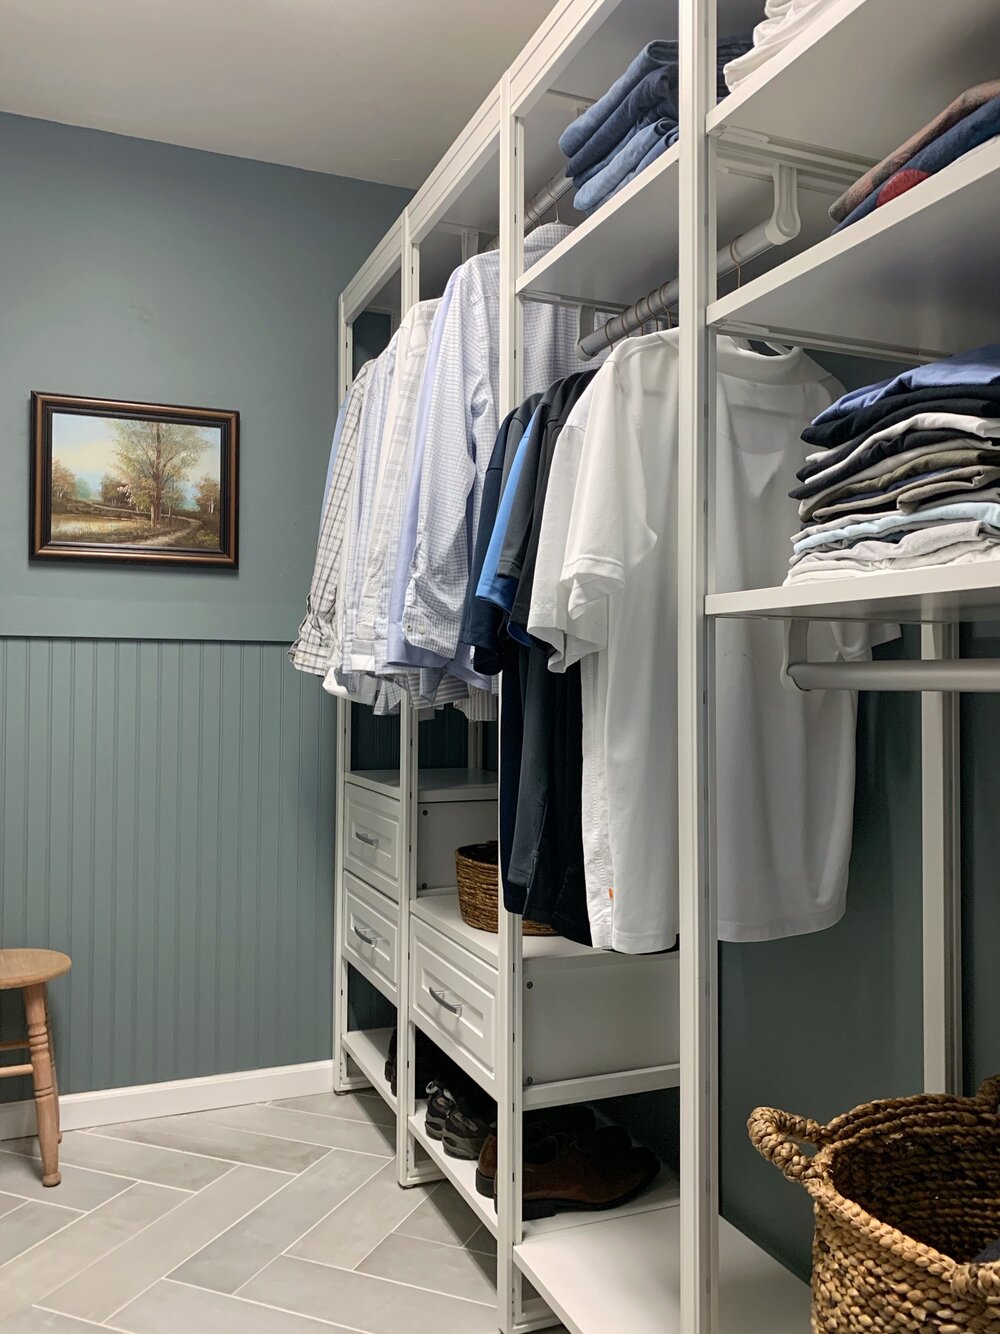 Organizing Your Bonus Room Closet to Fit Your Needs – Closets By Liberty